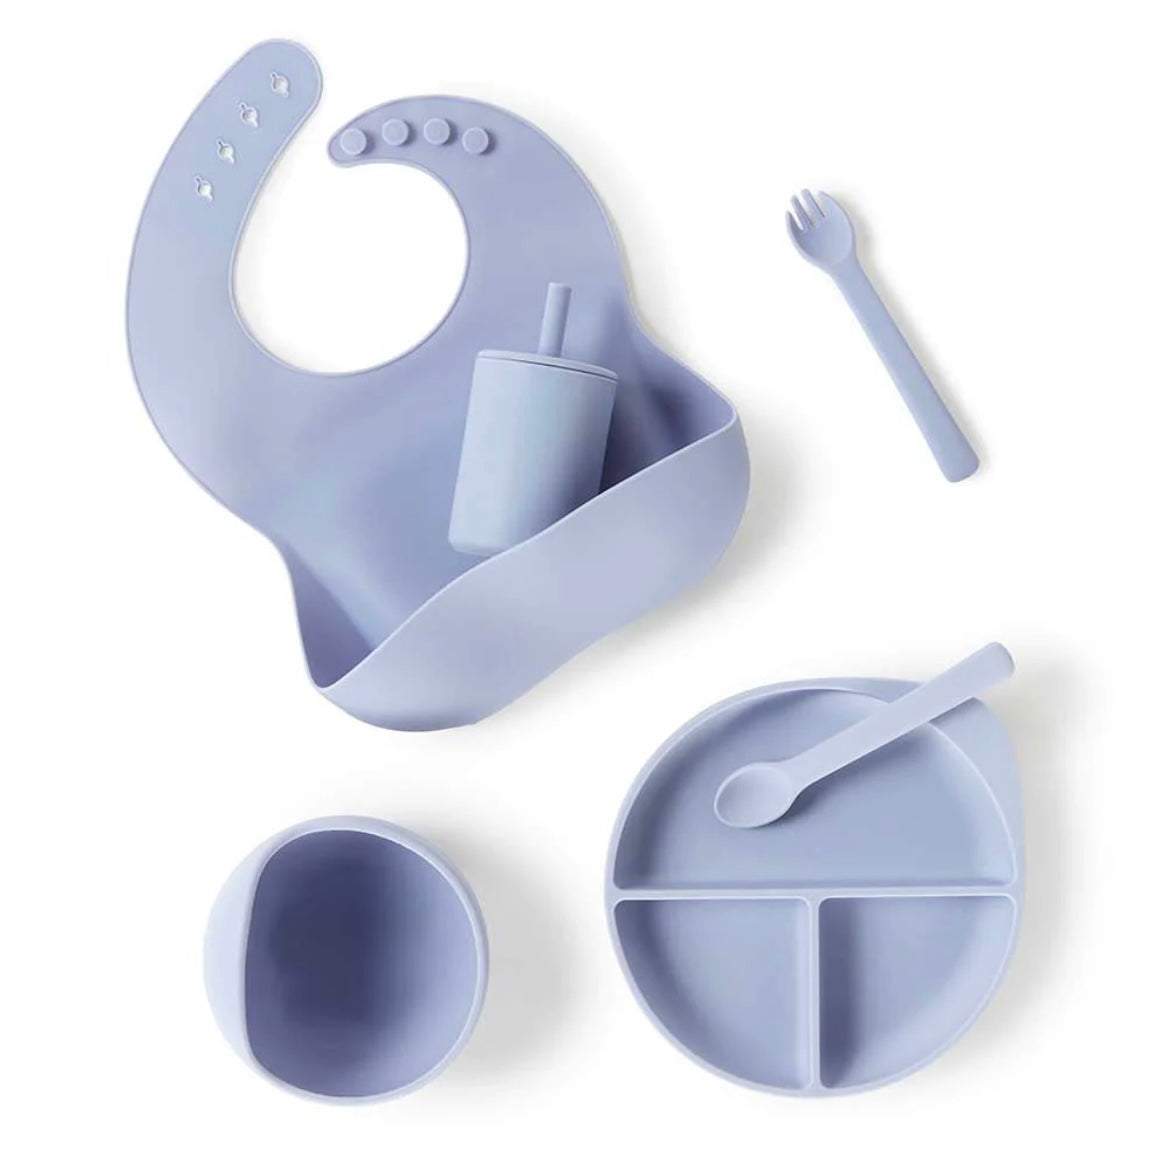 Snuggle Hunny Silicone Meal Kit Zen